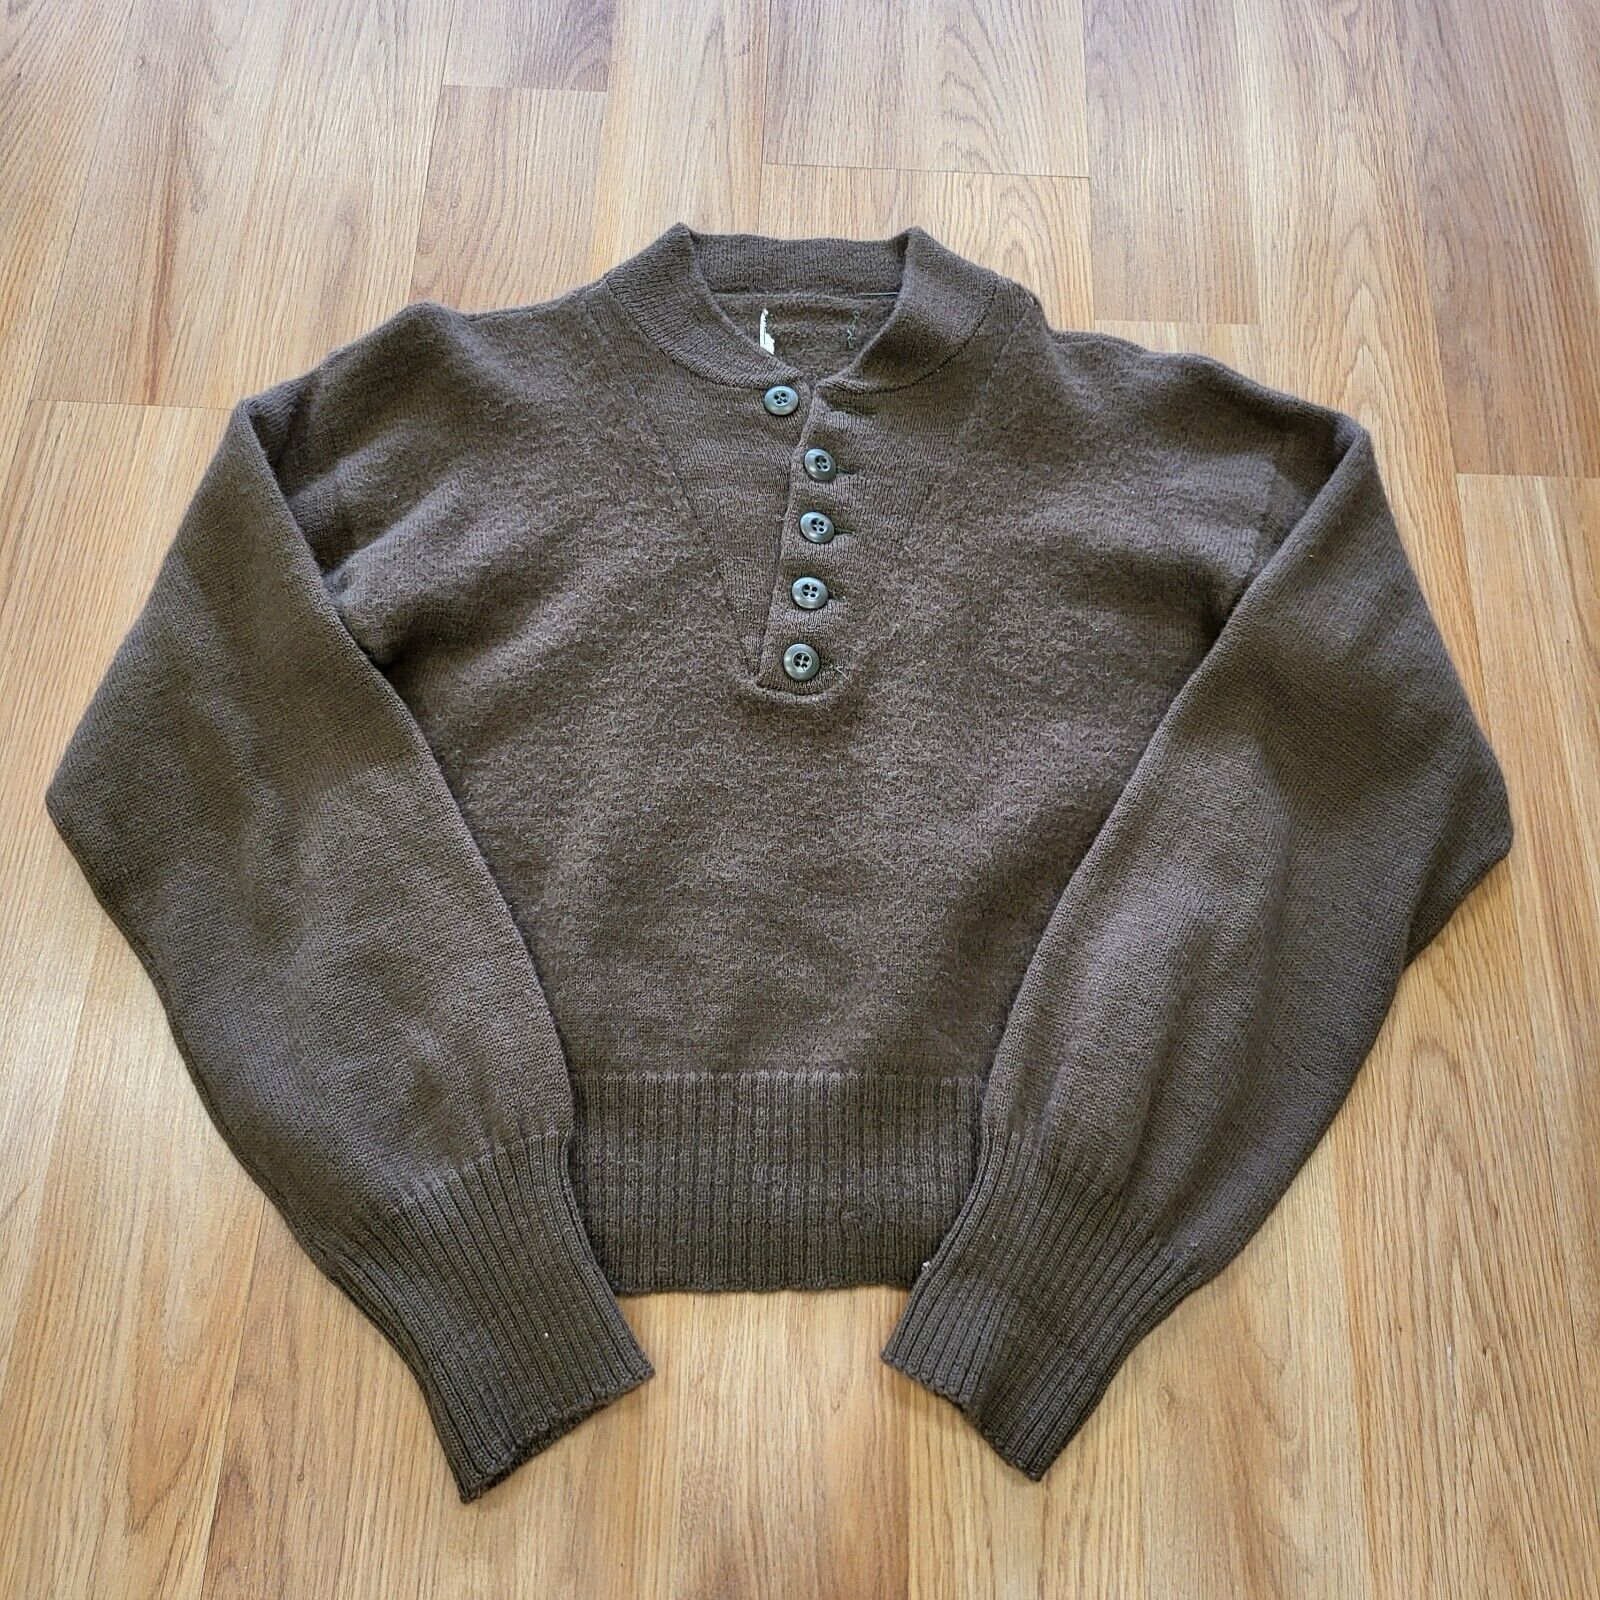 Vintage Military Henley Sweatshirt Size M Green Olive 1/4 Button Sweater 80s